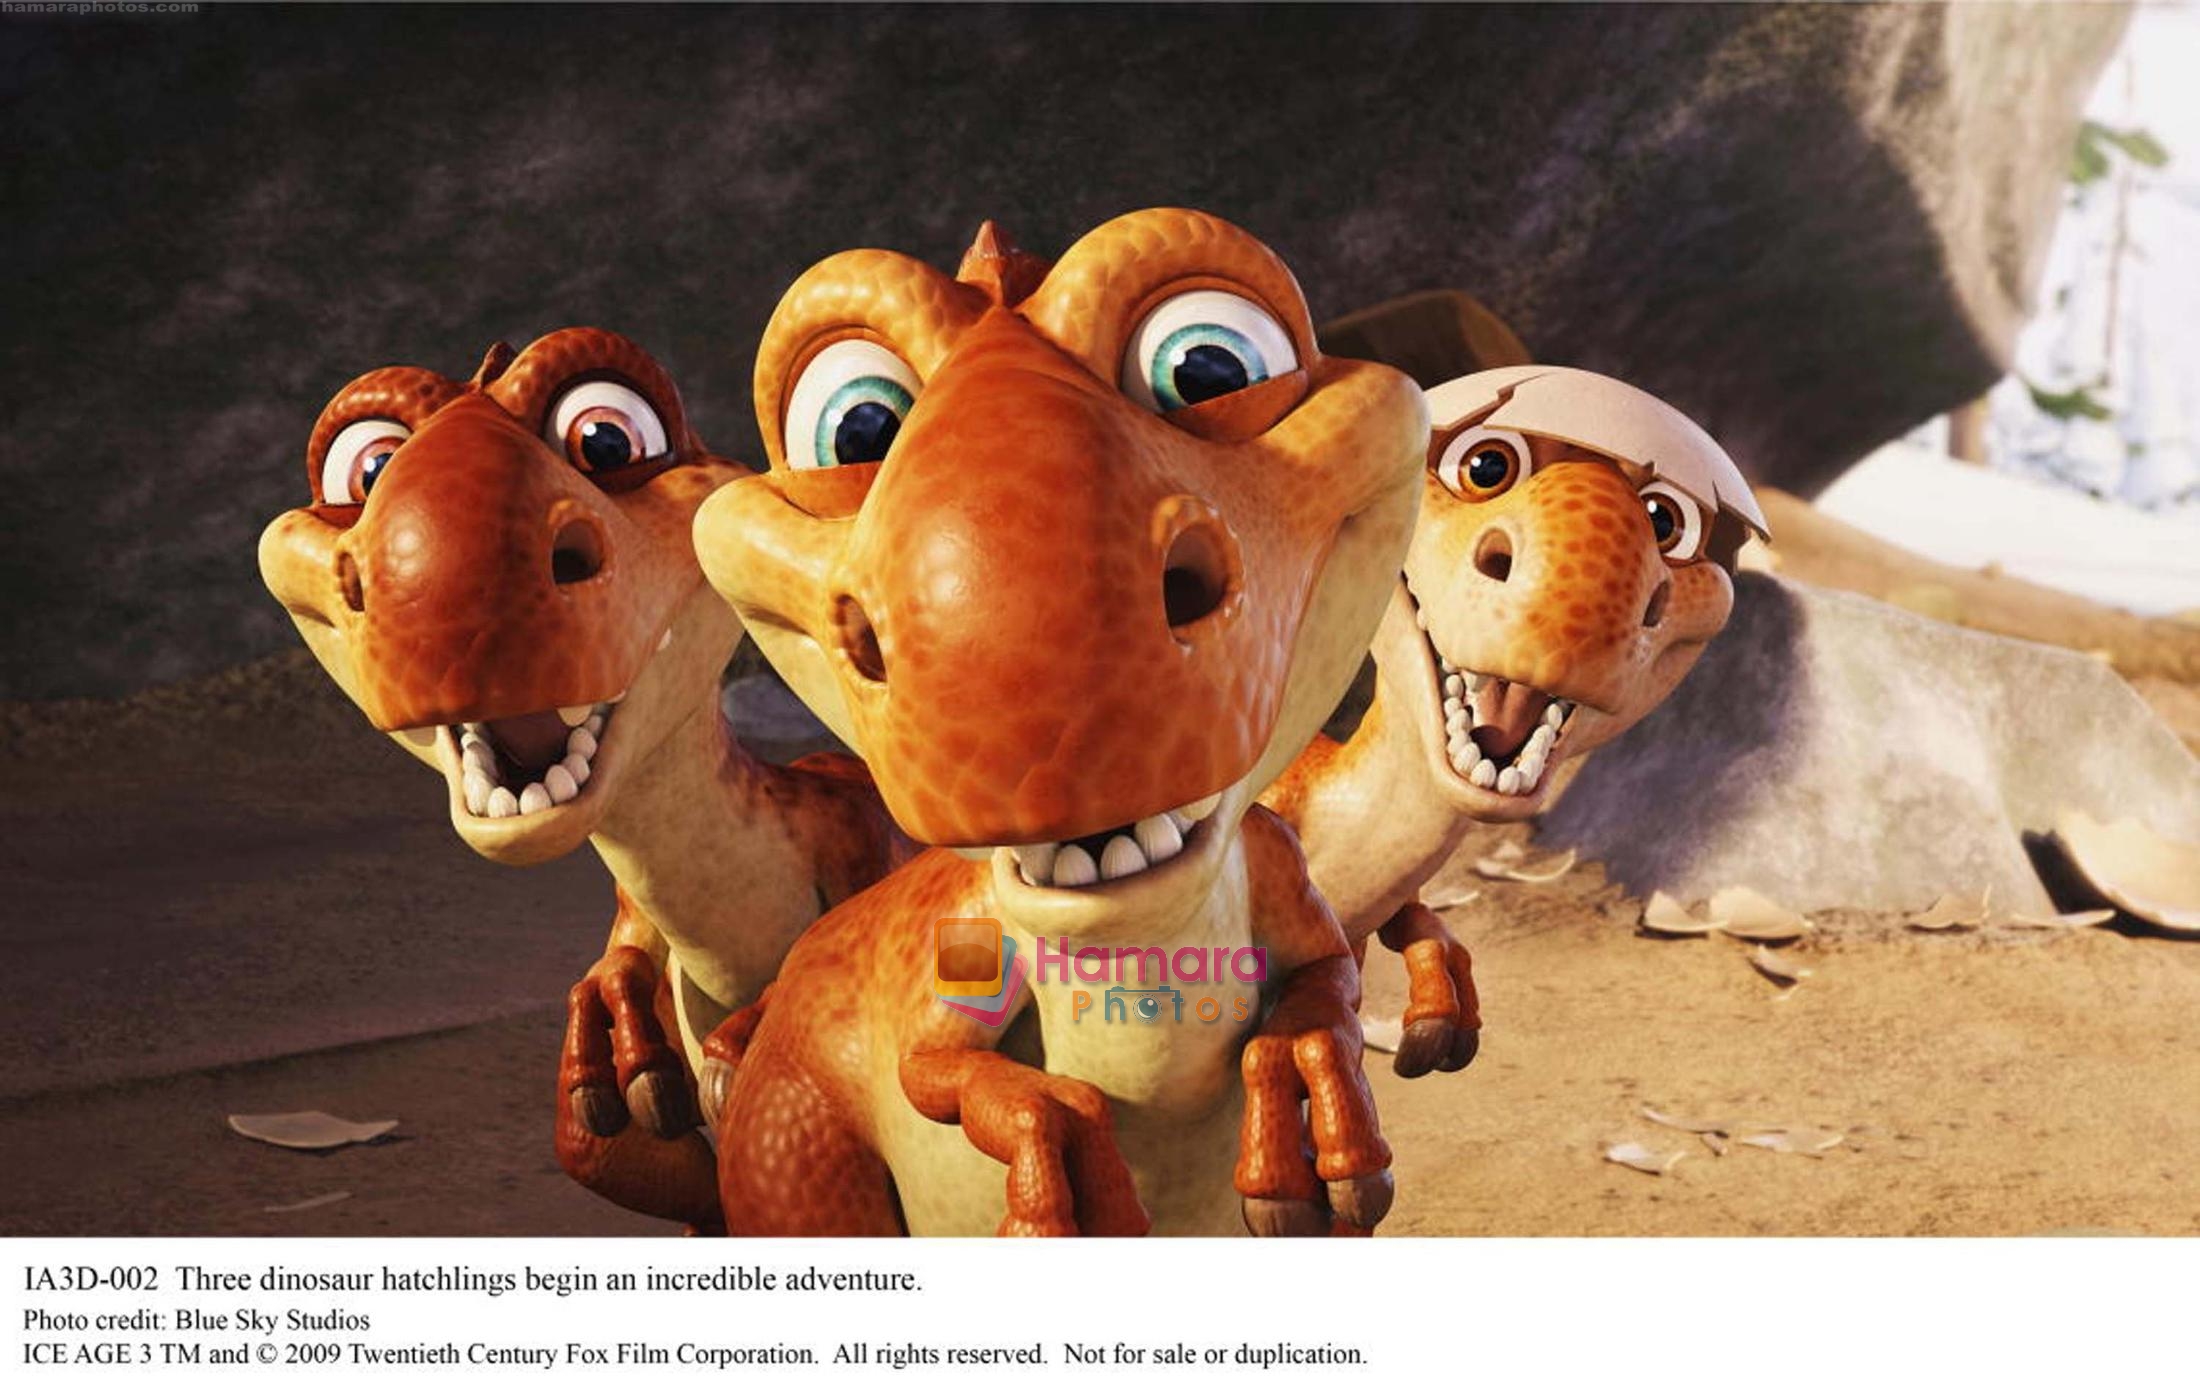 in the still from movie Ice Age 3